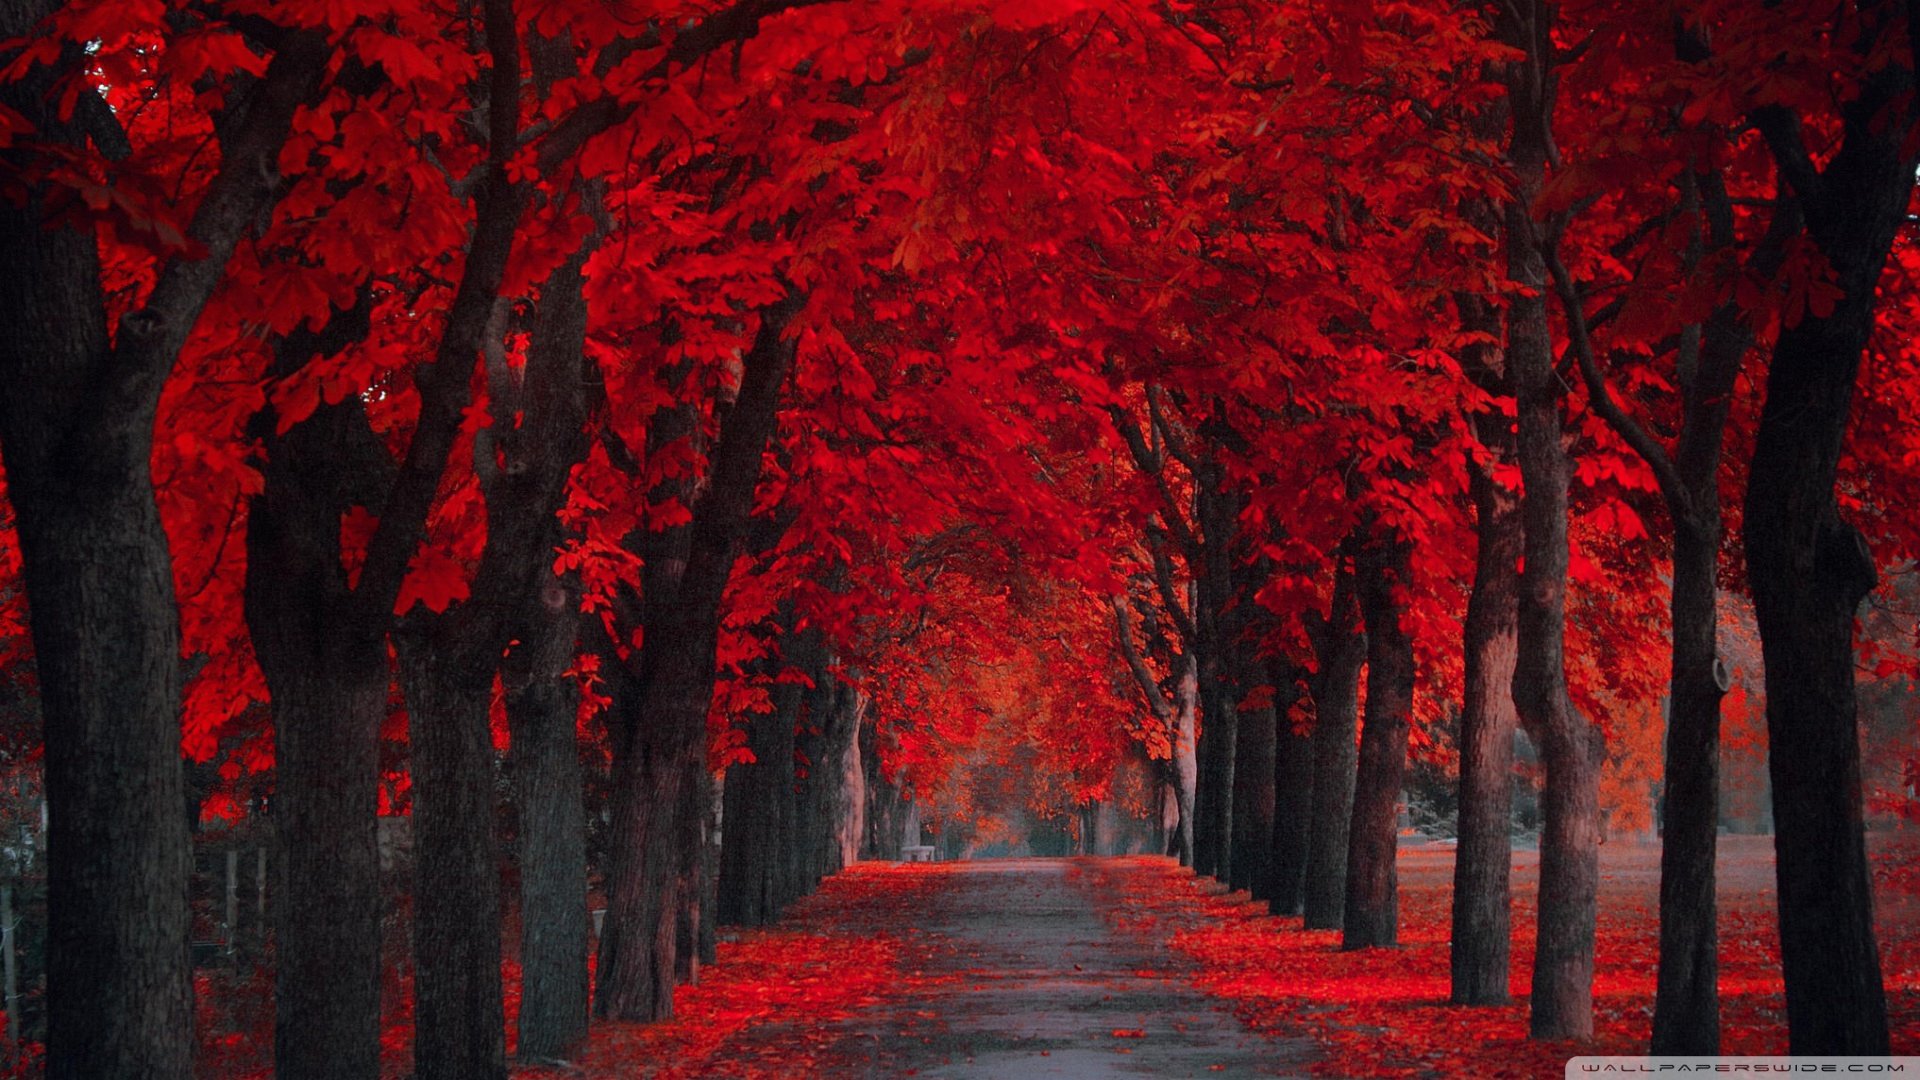 Wallpaper extremly red leaves autumn 1920 x 1080 full hd